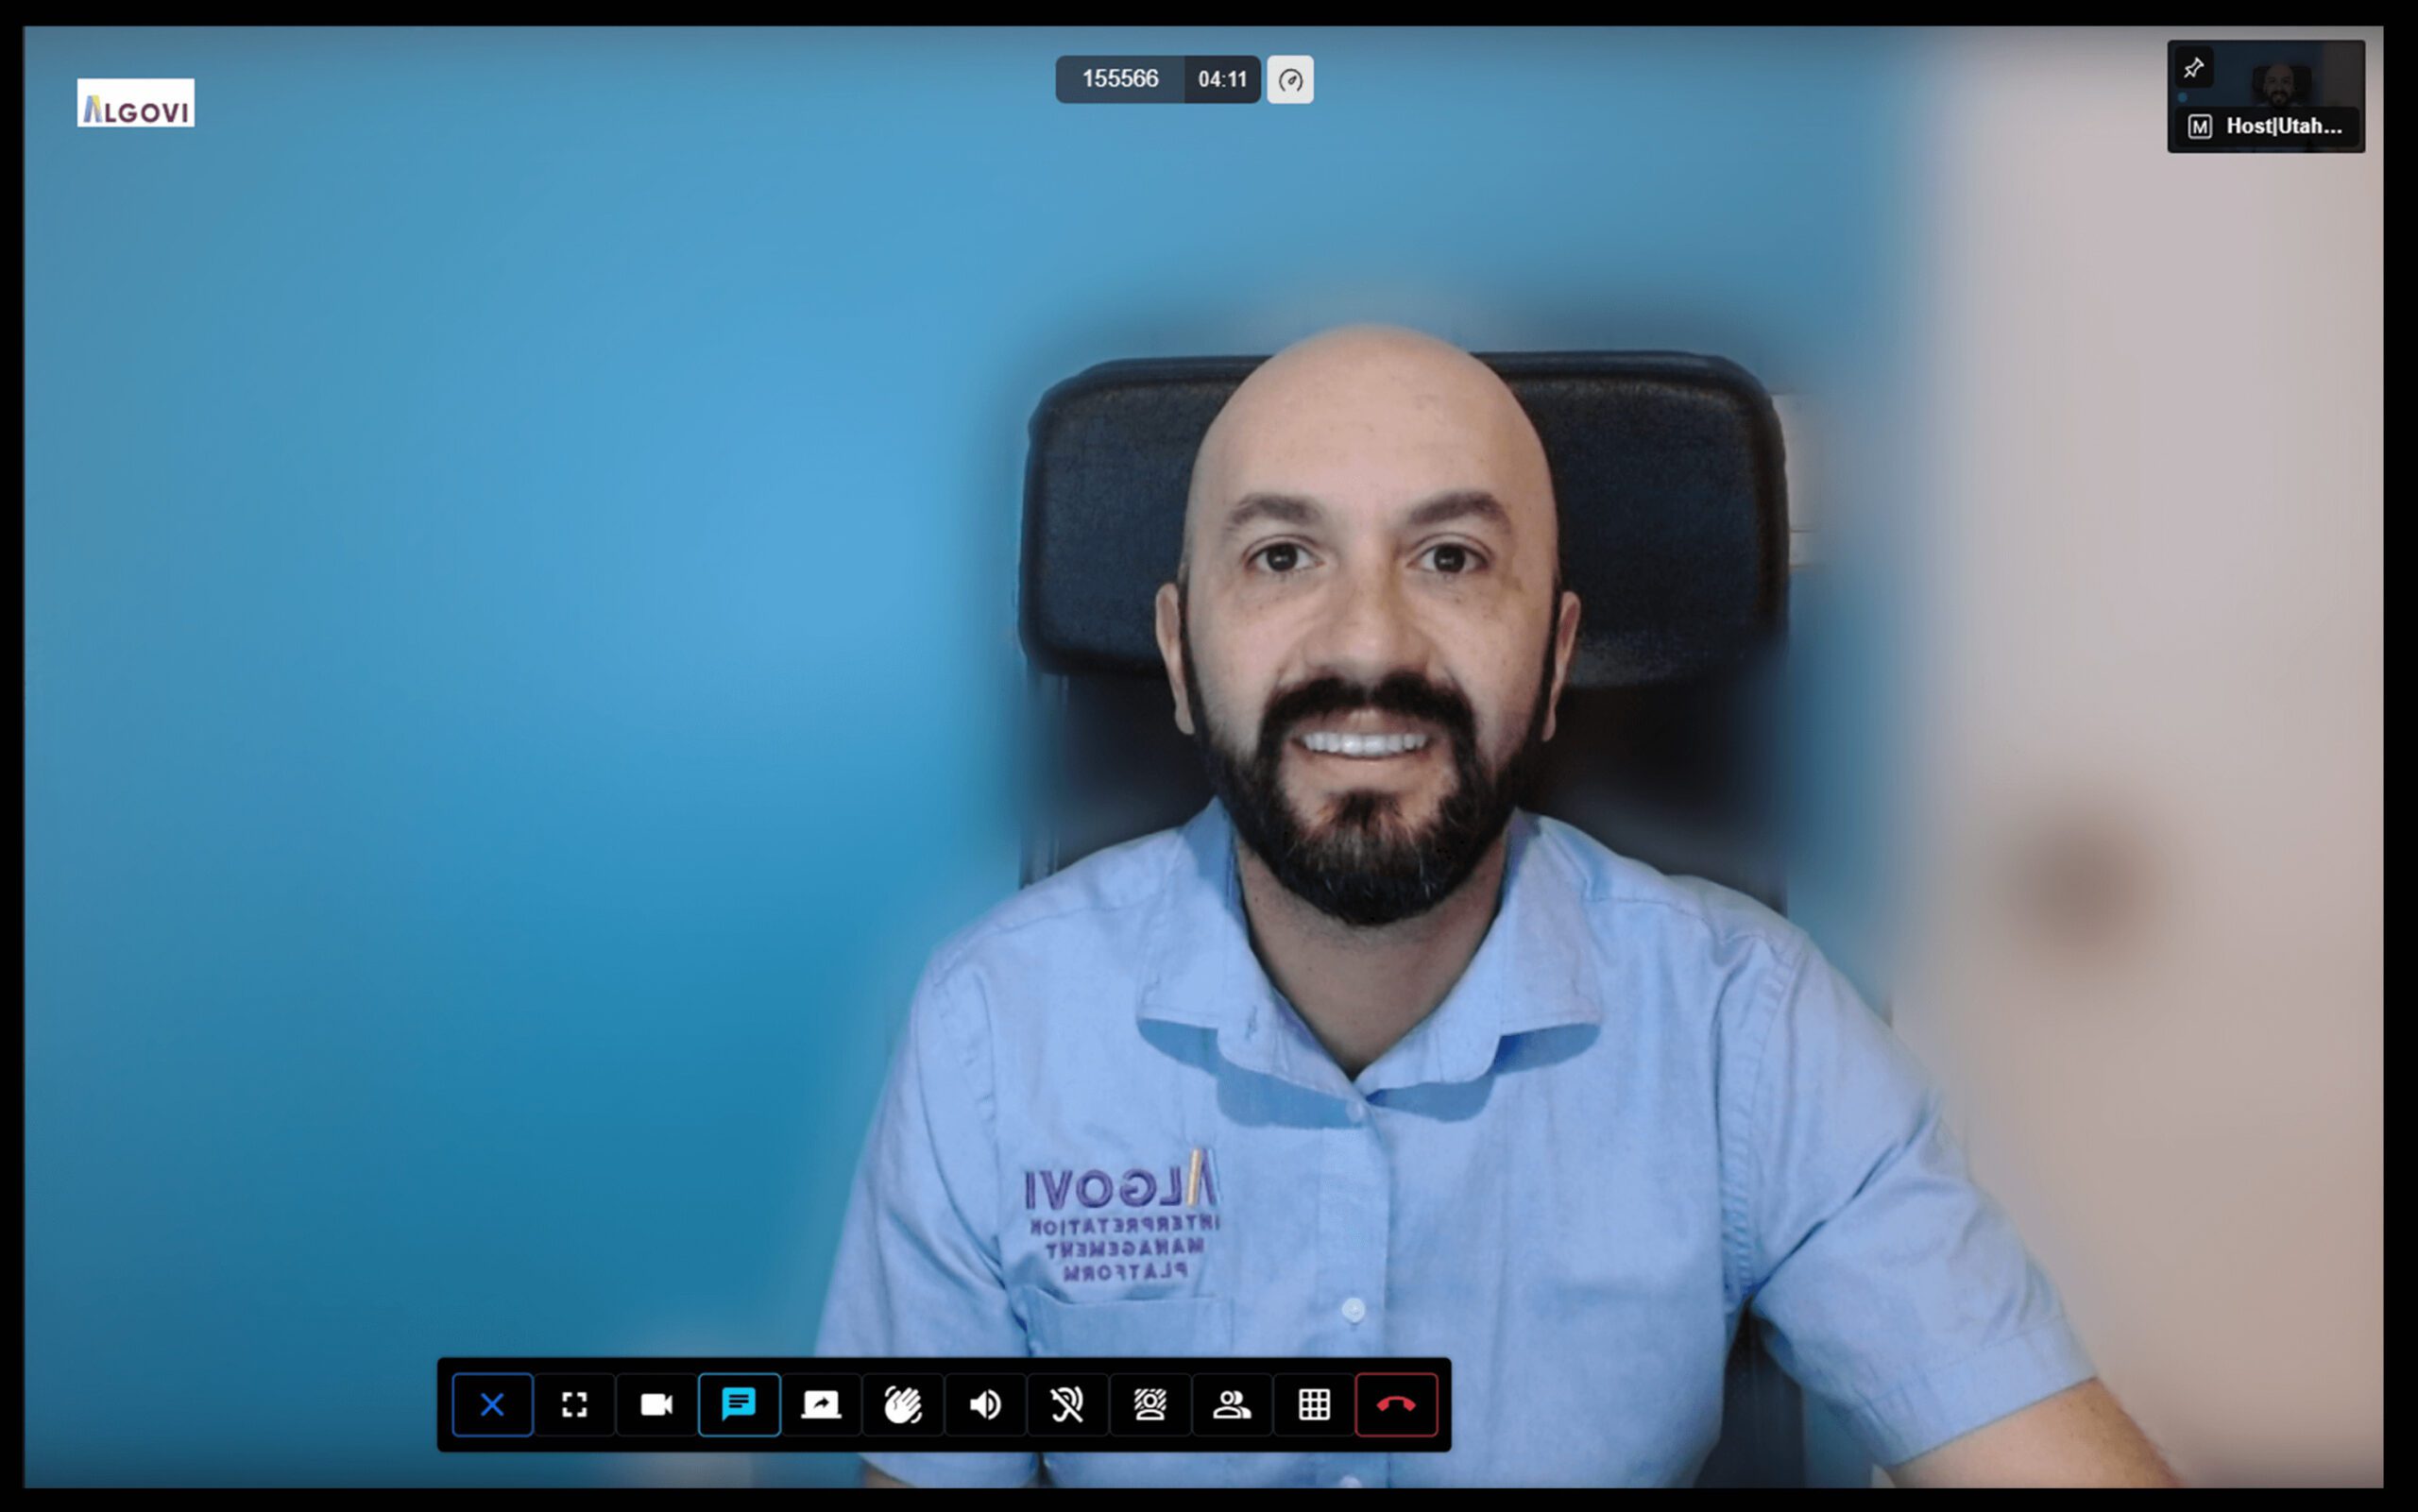 A smiling man with a beard in a collared shirt participating in a video call, seen on a computer screen with interface icons at the bottom.